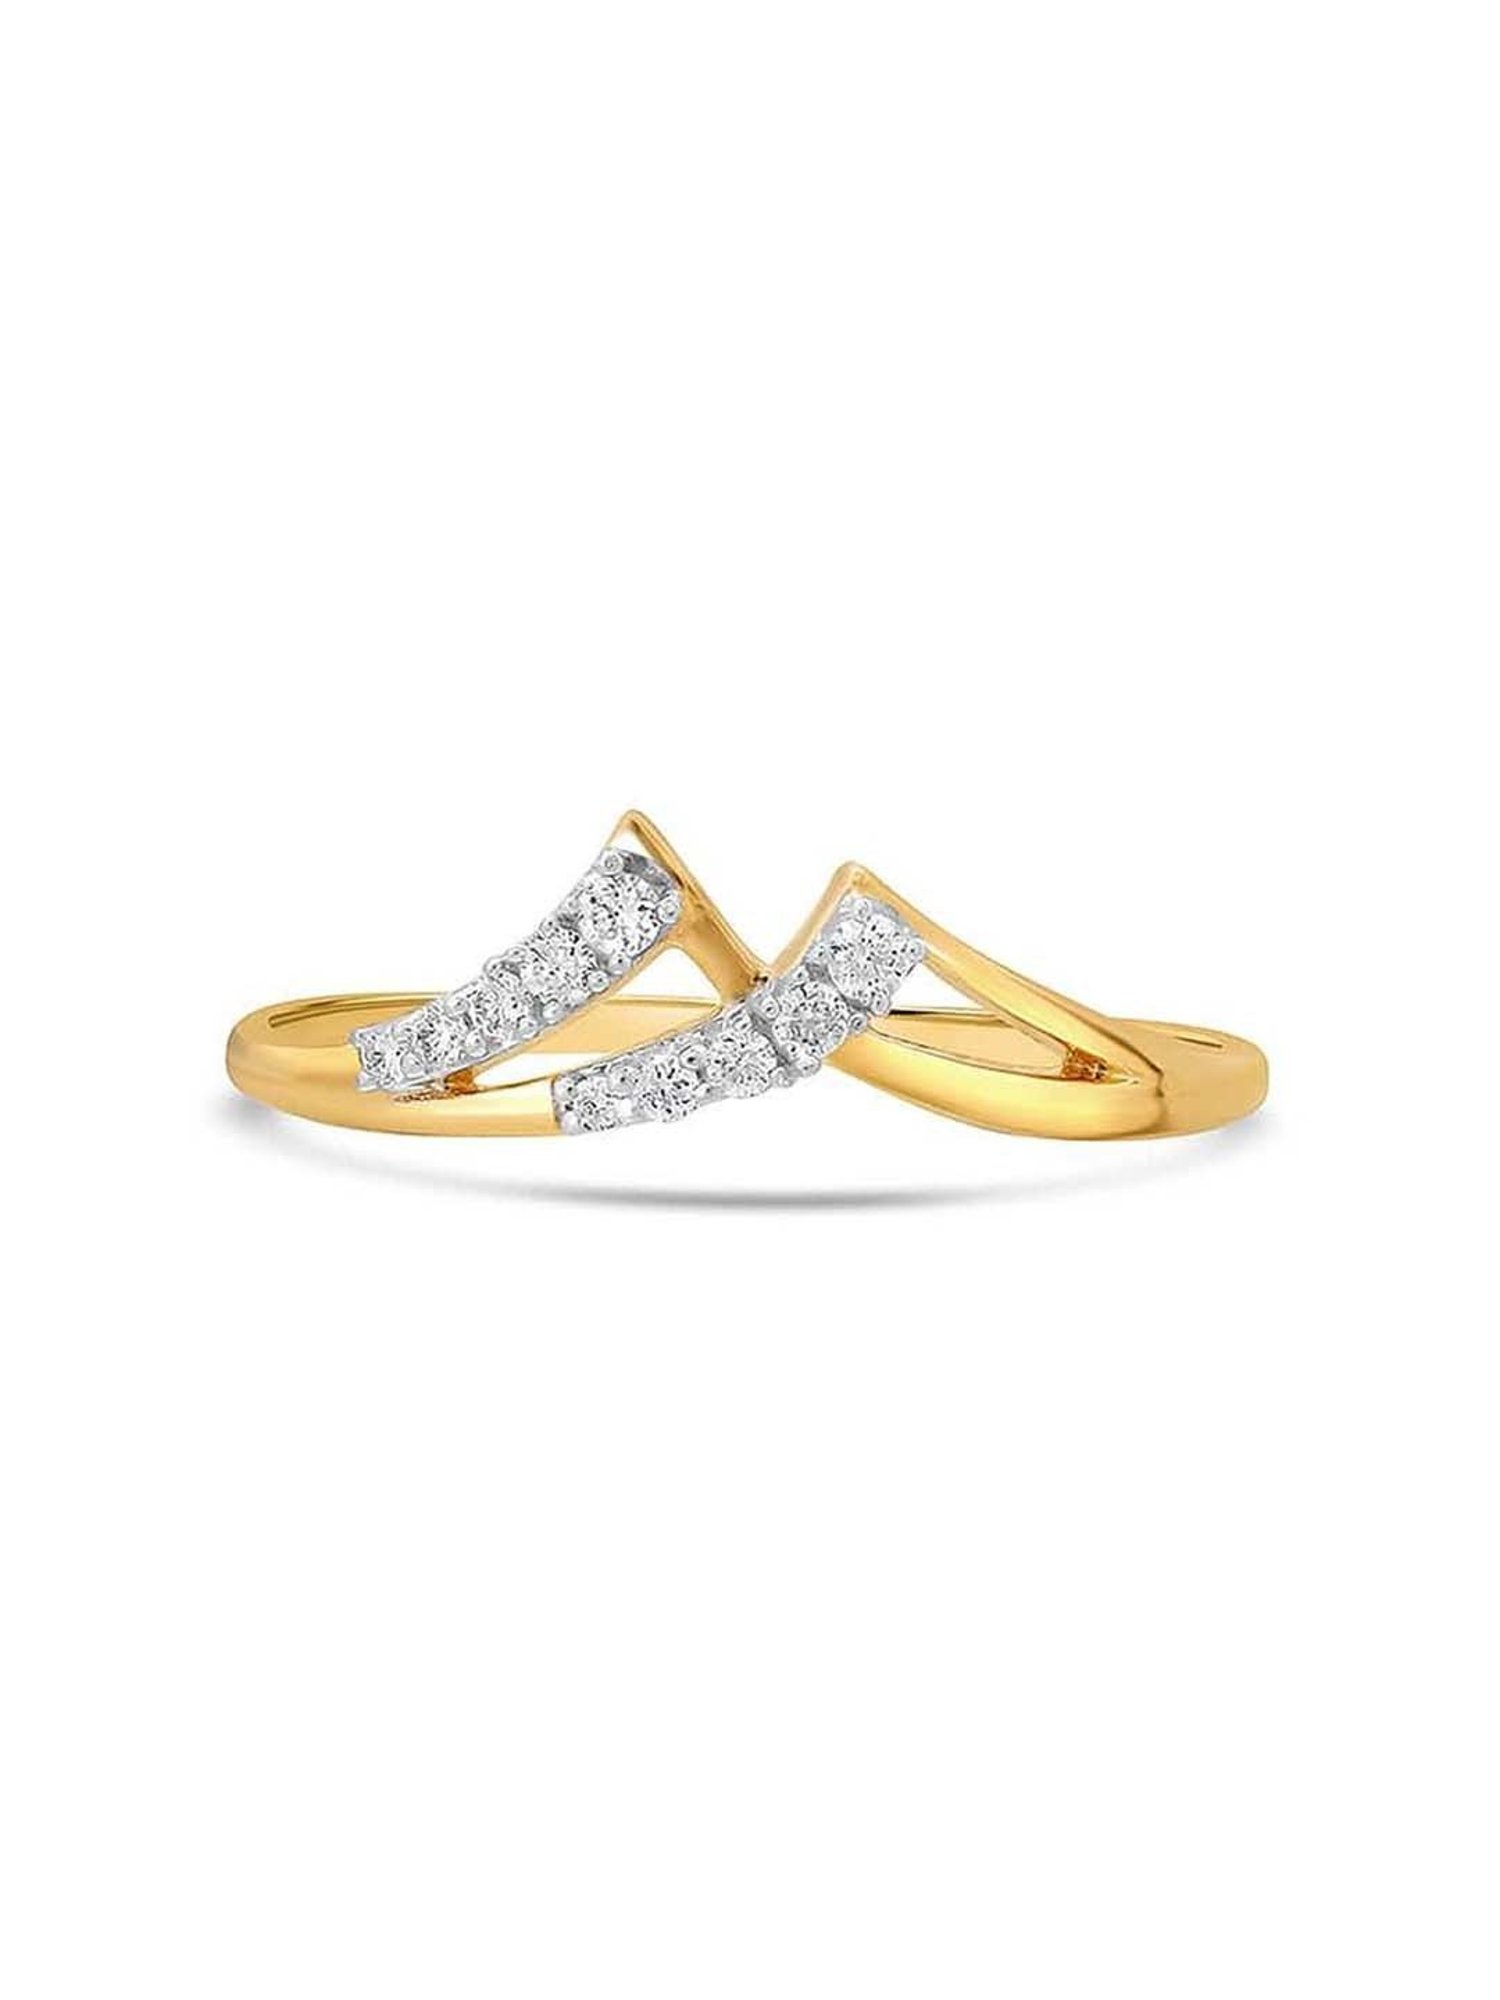 Mia By Tanishq 18kt Yellow Gold Shell Finger Ring | 18kt gold ring, Finger  rings, 18kt gold